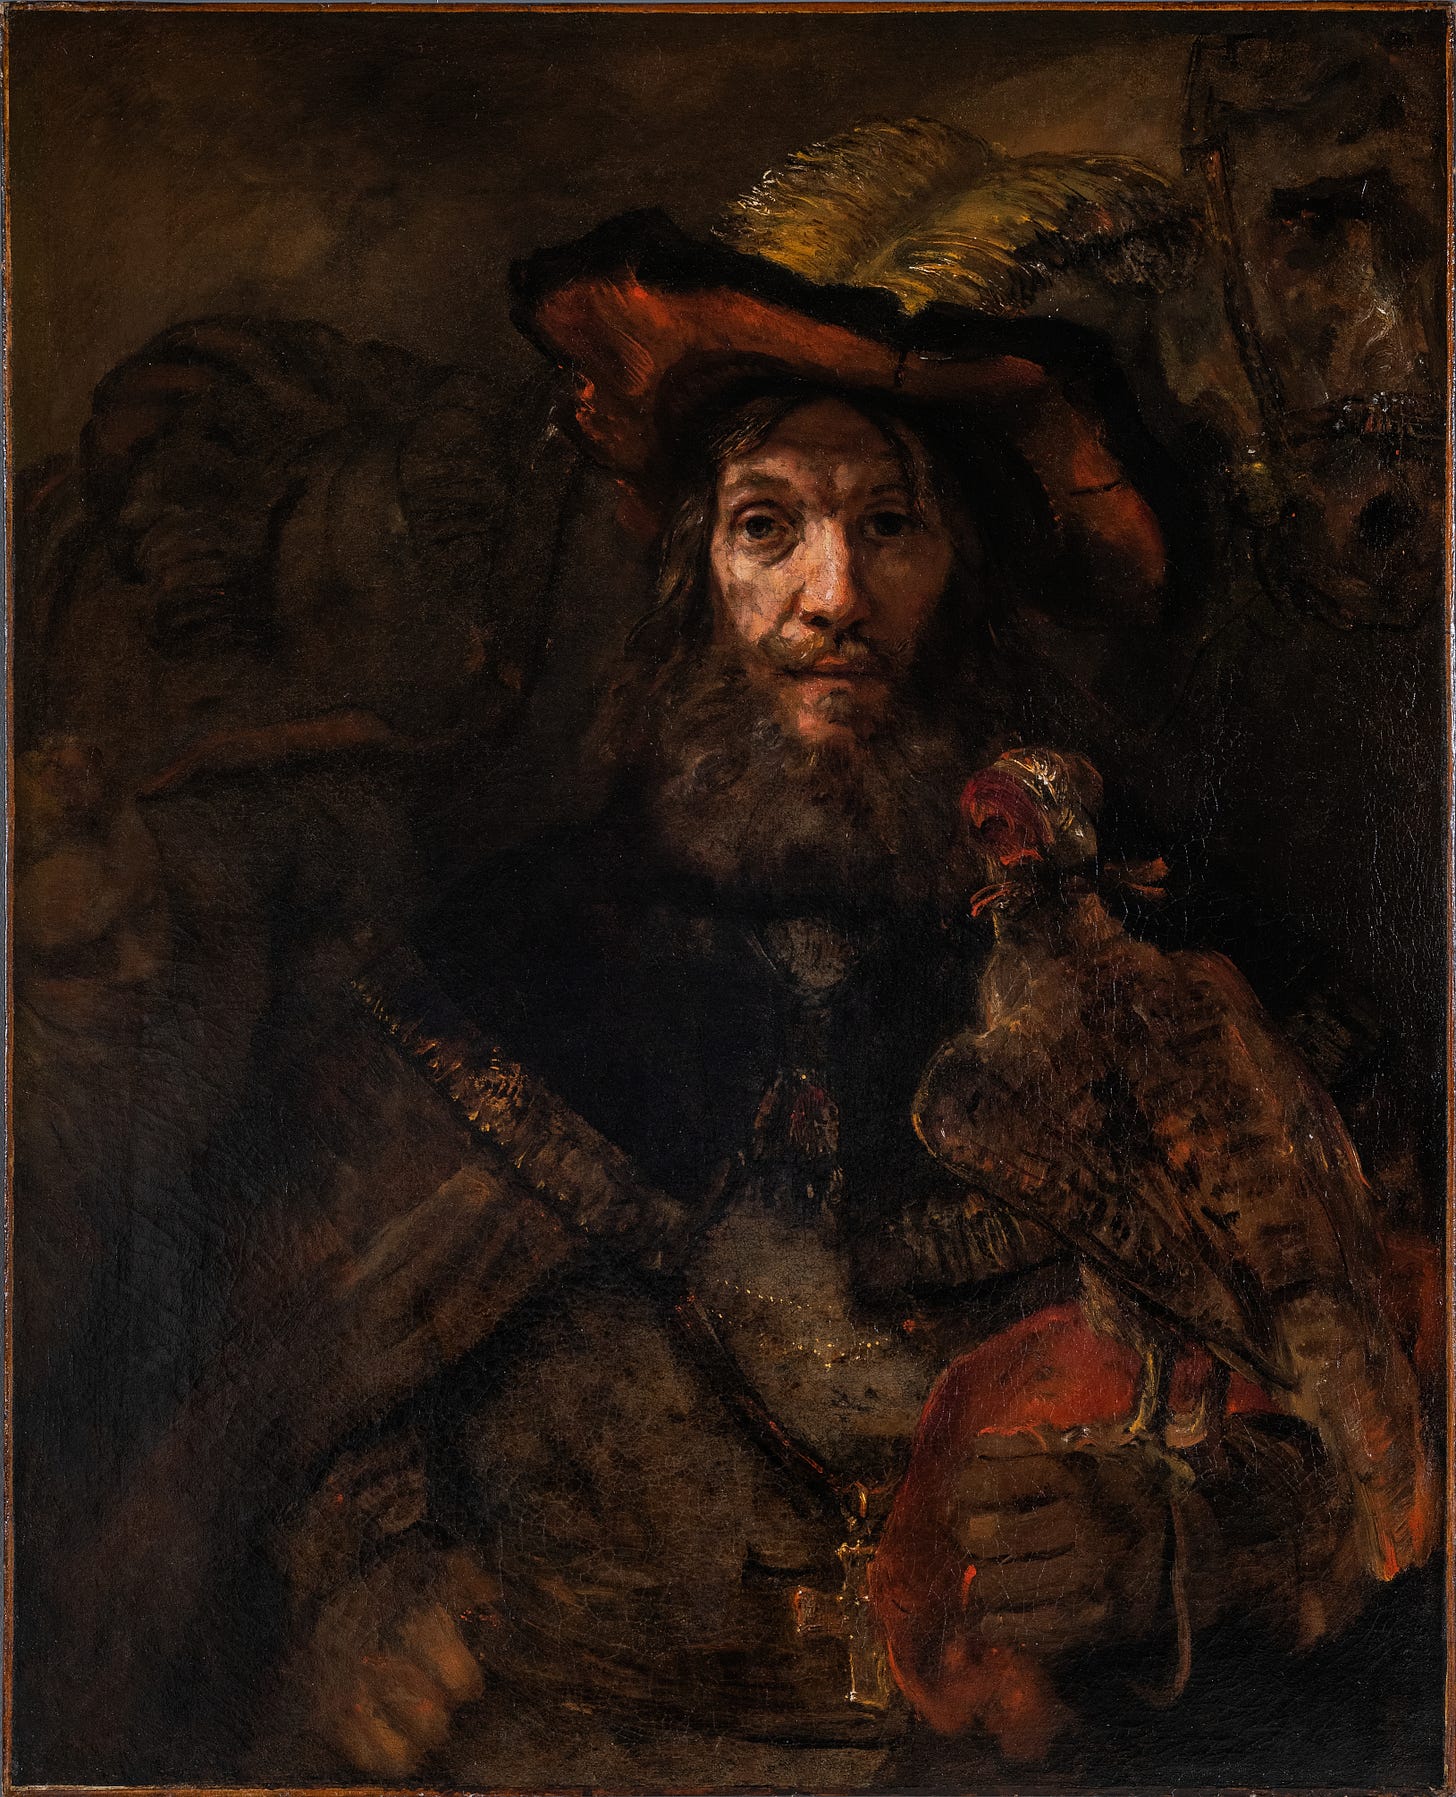 The Knight with the Falcon (1660s) by Rembrandt van Rijn